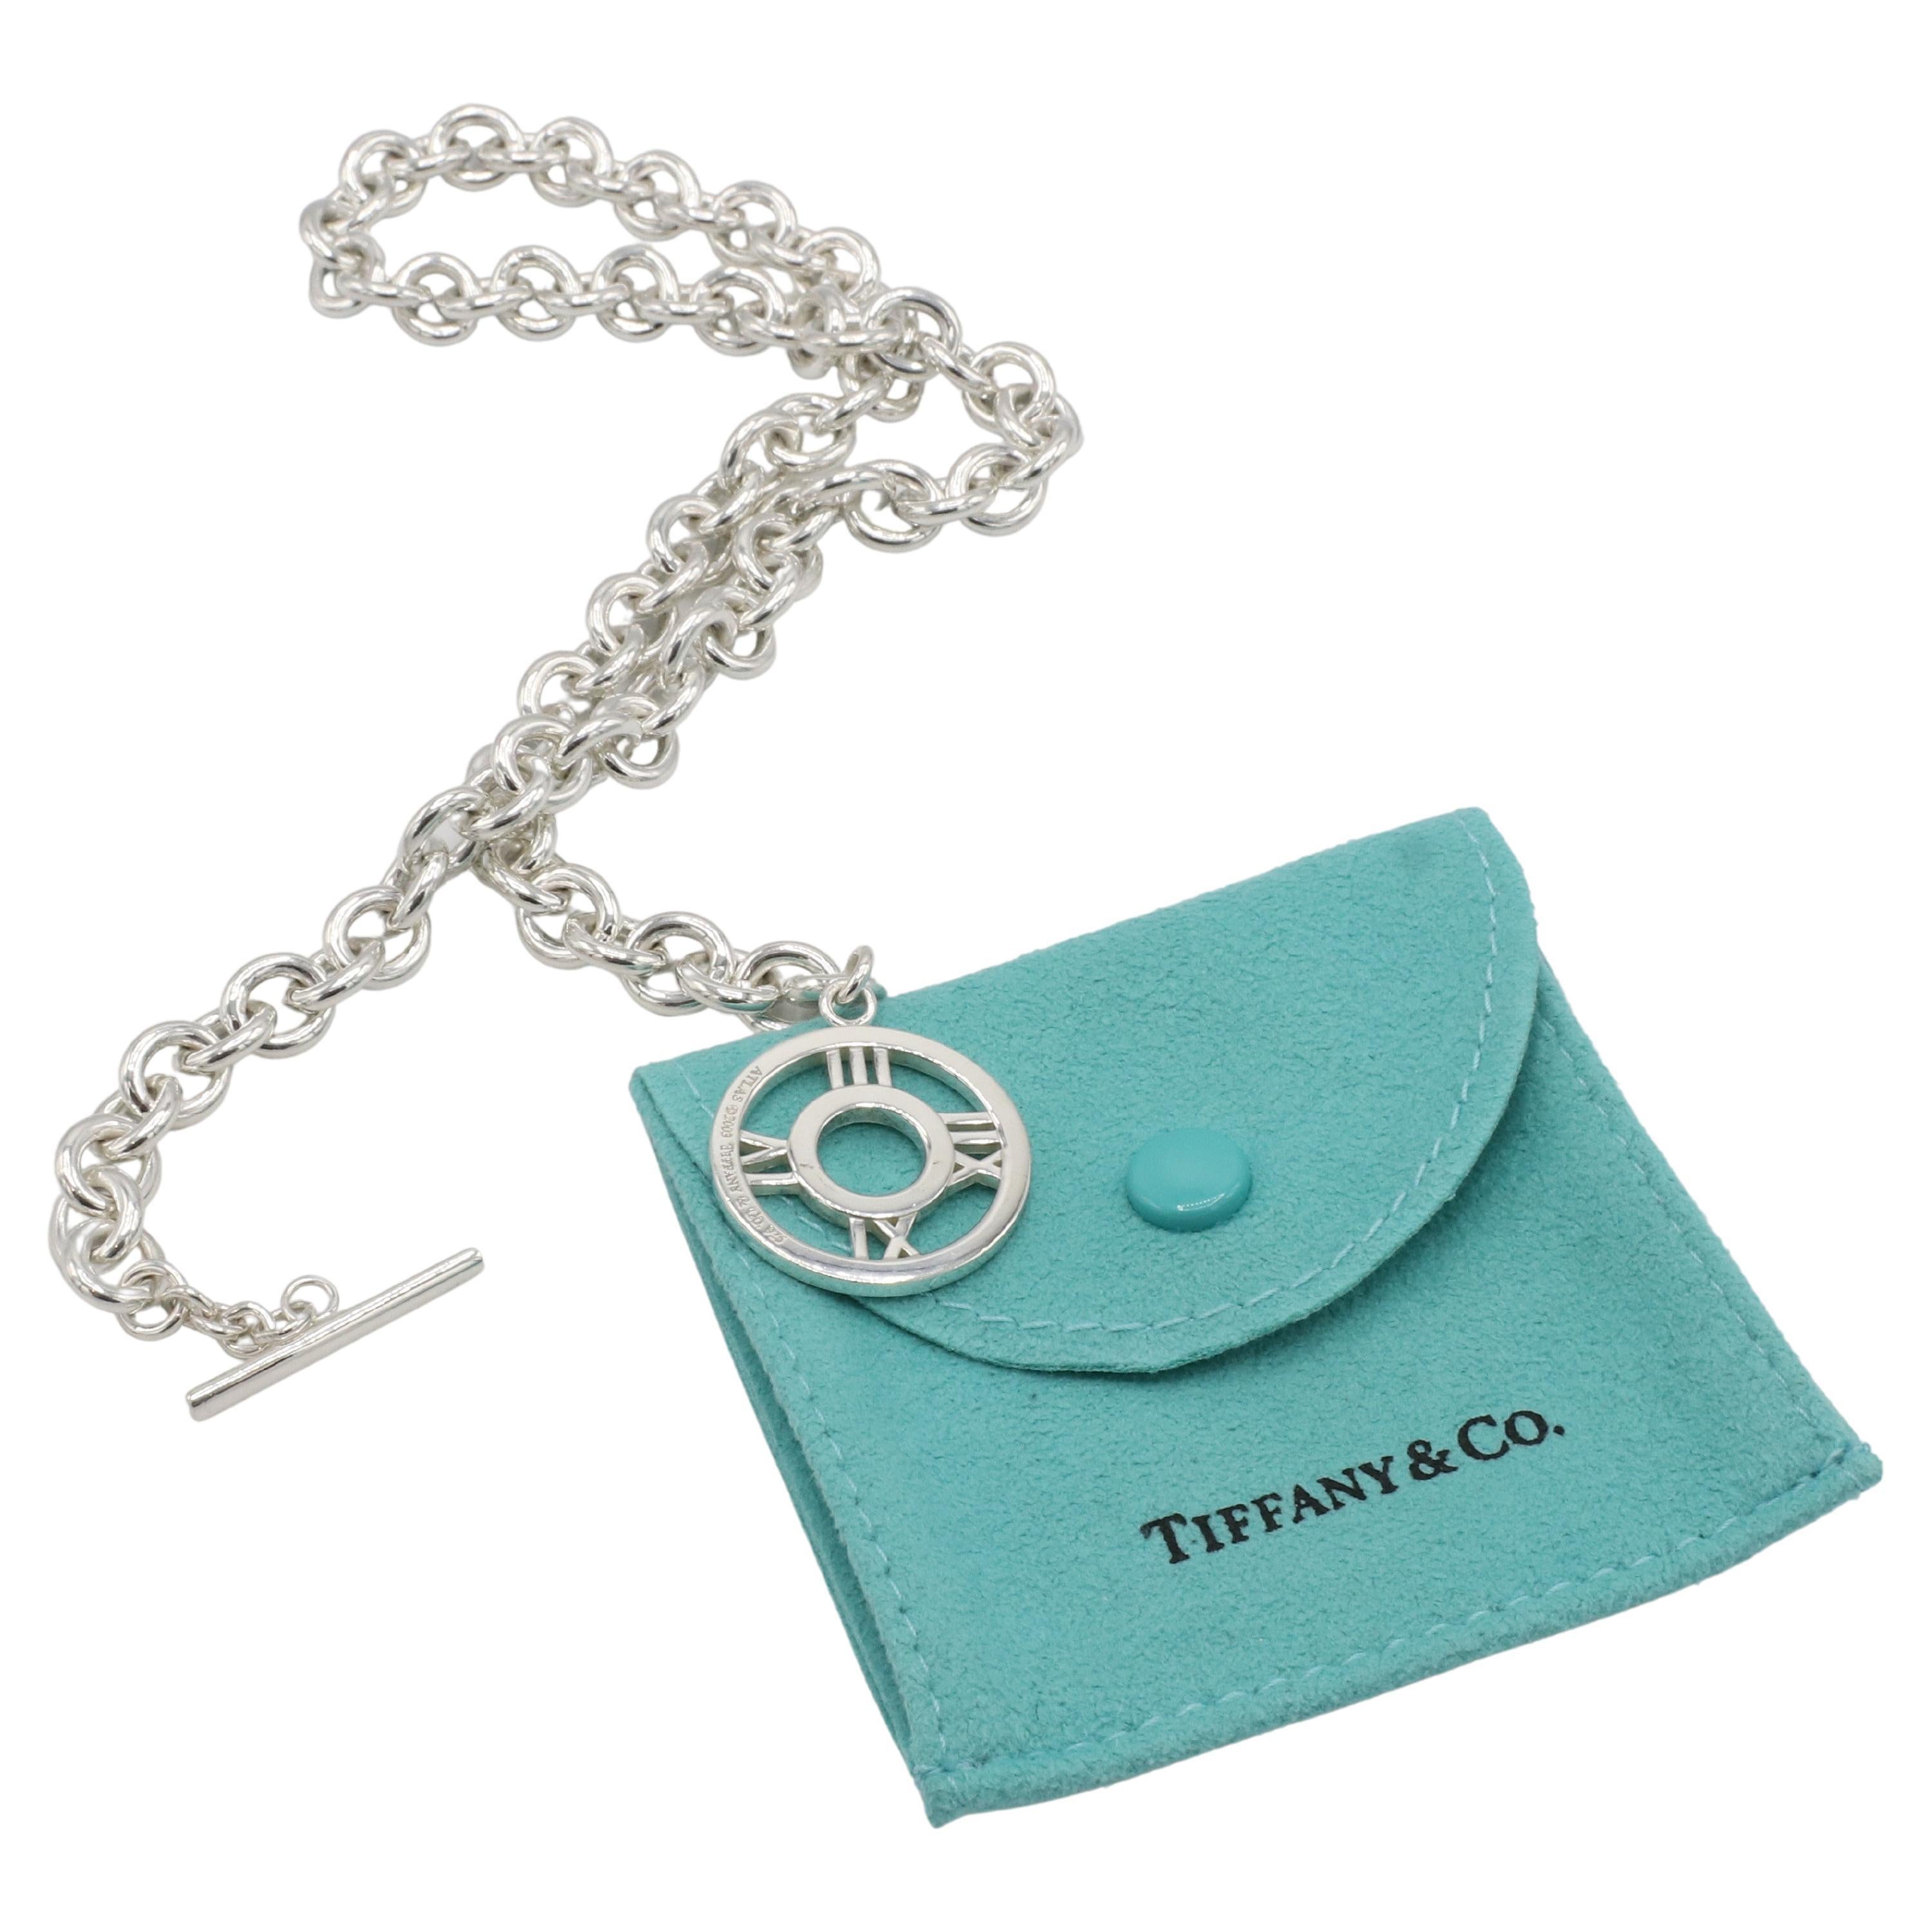 Tiffany & Co. Sterling Silver Atlas Chain Link Toggle Necklace 
Metal: Sterling silver
Weight: 60.14 grams
Length: 17 inches
Disc: 23mm
Links: 8 x 9mm
Signed: ATLAS ©2003 Tiffany & Co. 925
